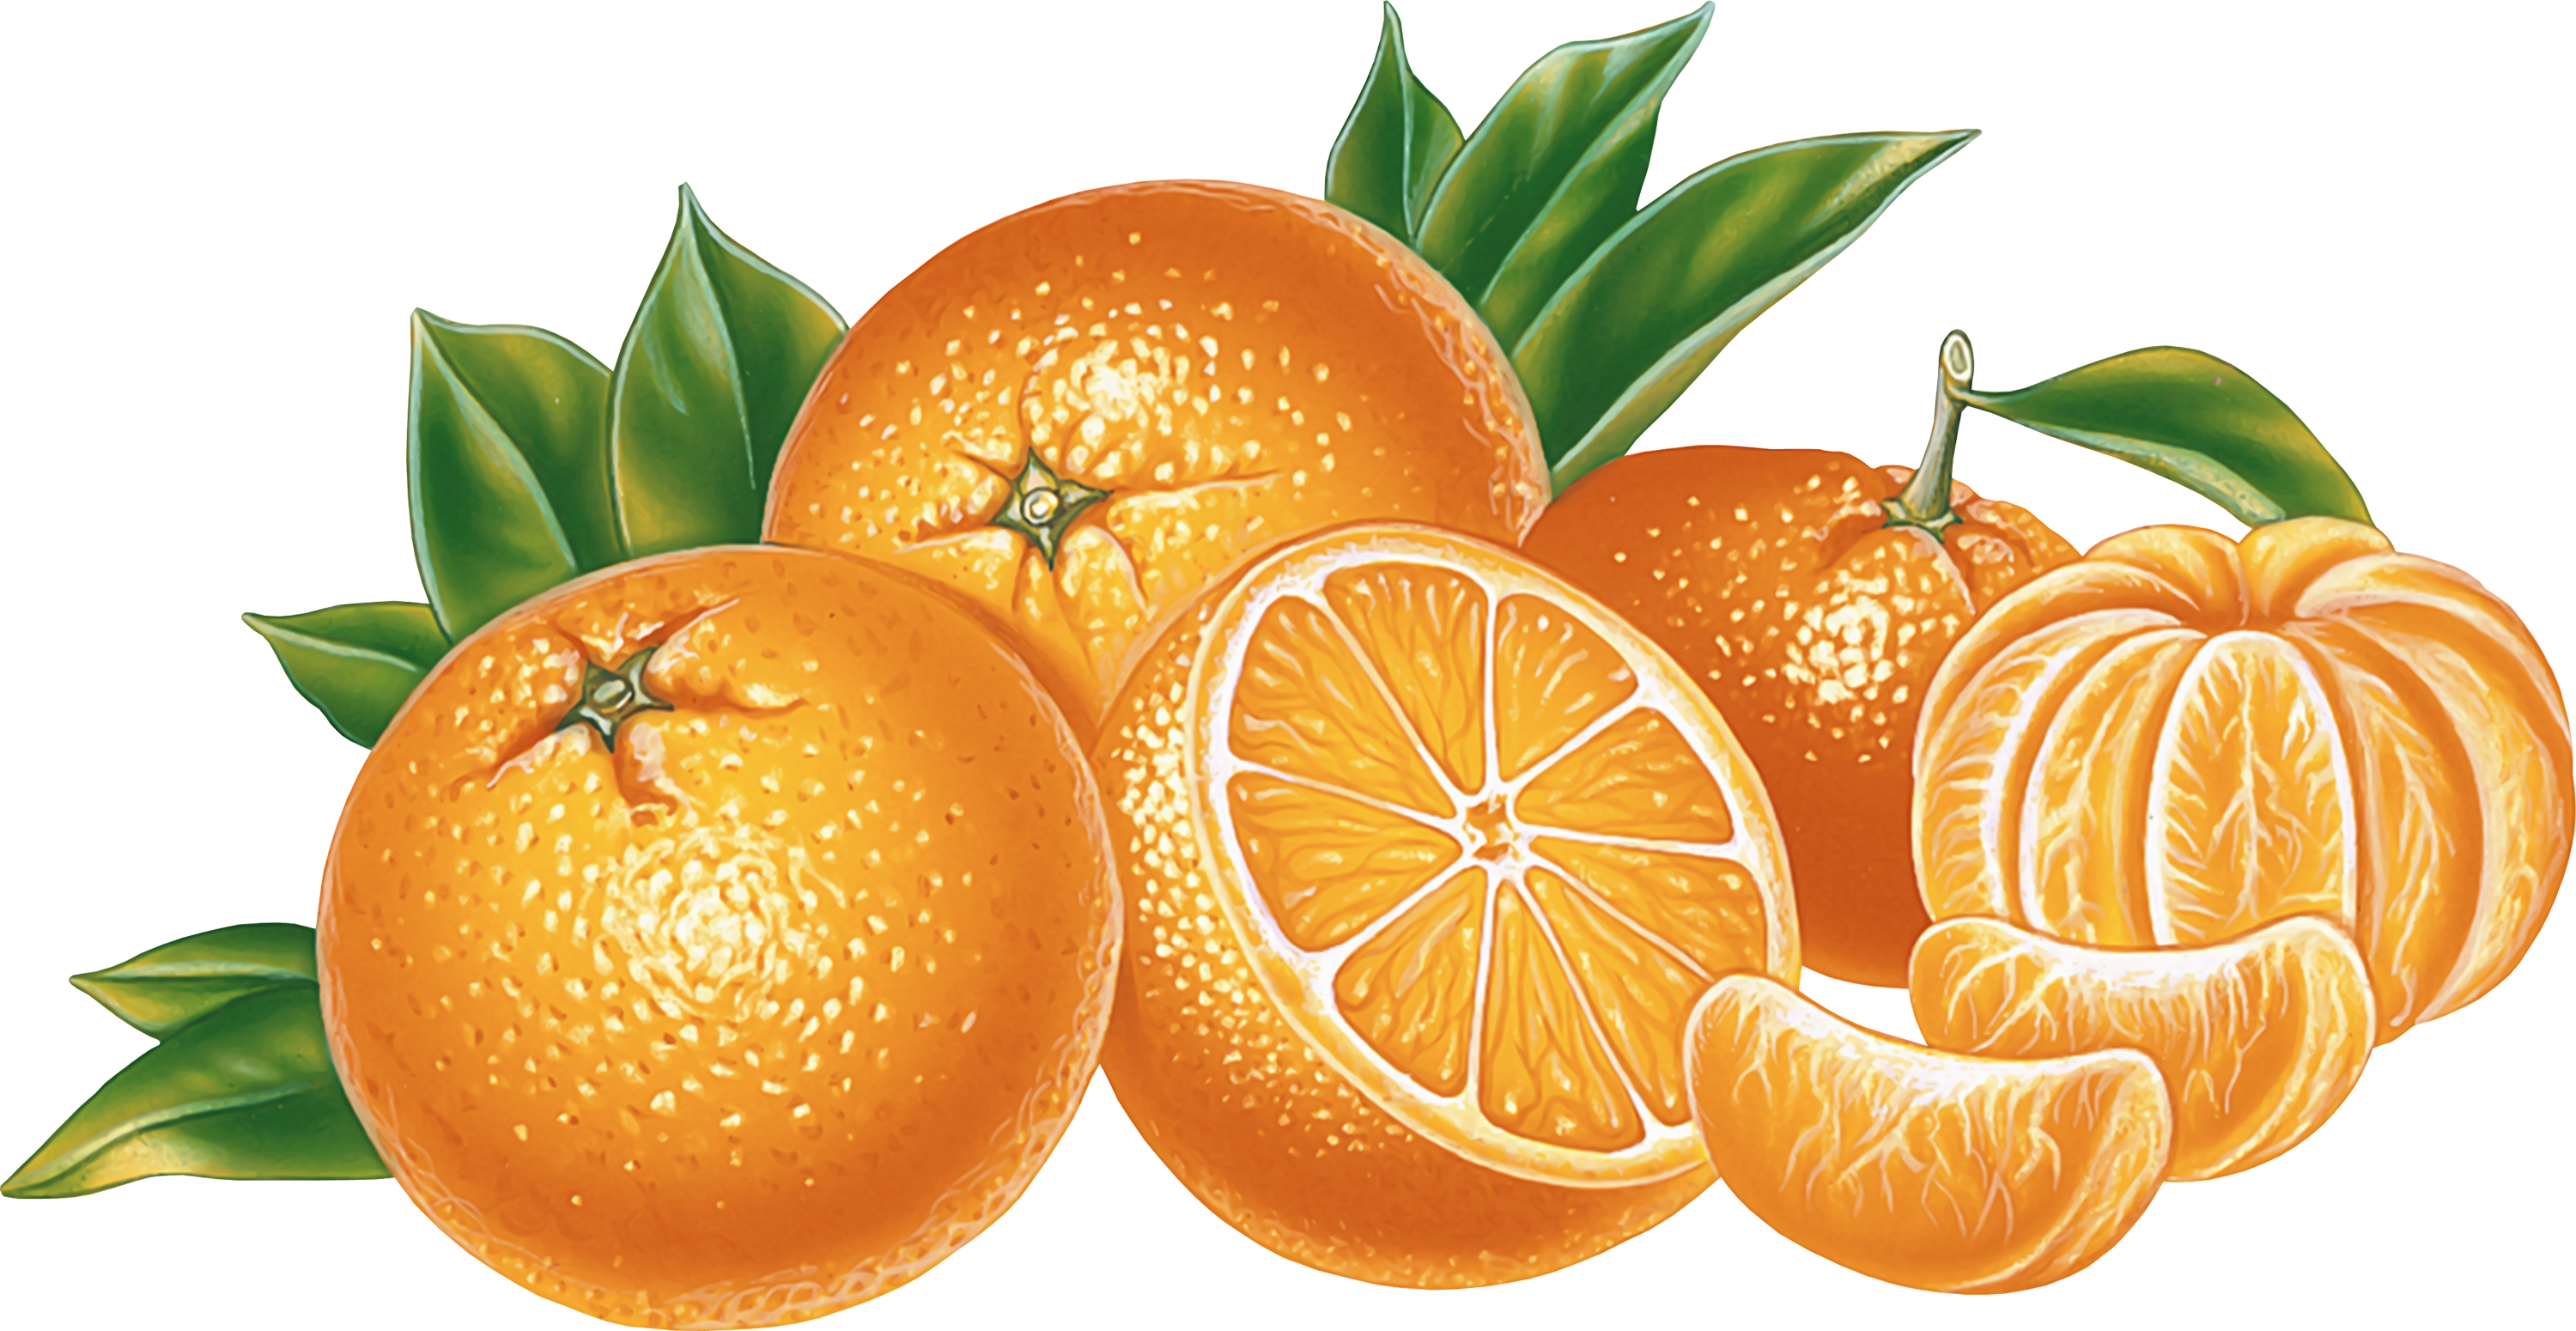 Orange Png Image, Free Download - Gallery, Transparent background PNG HD thumbnail